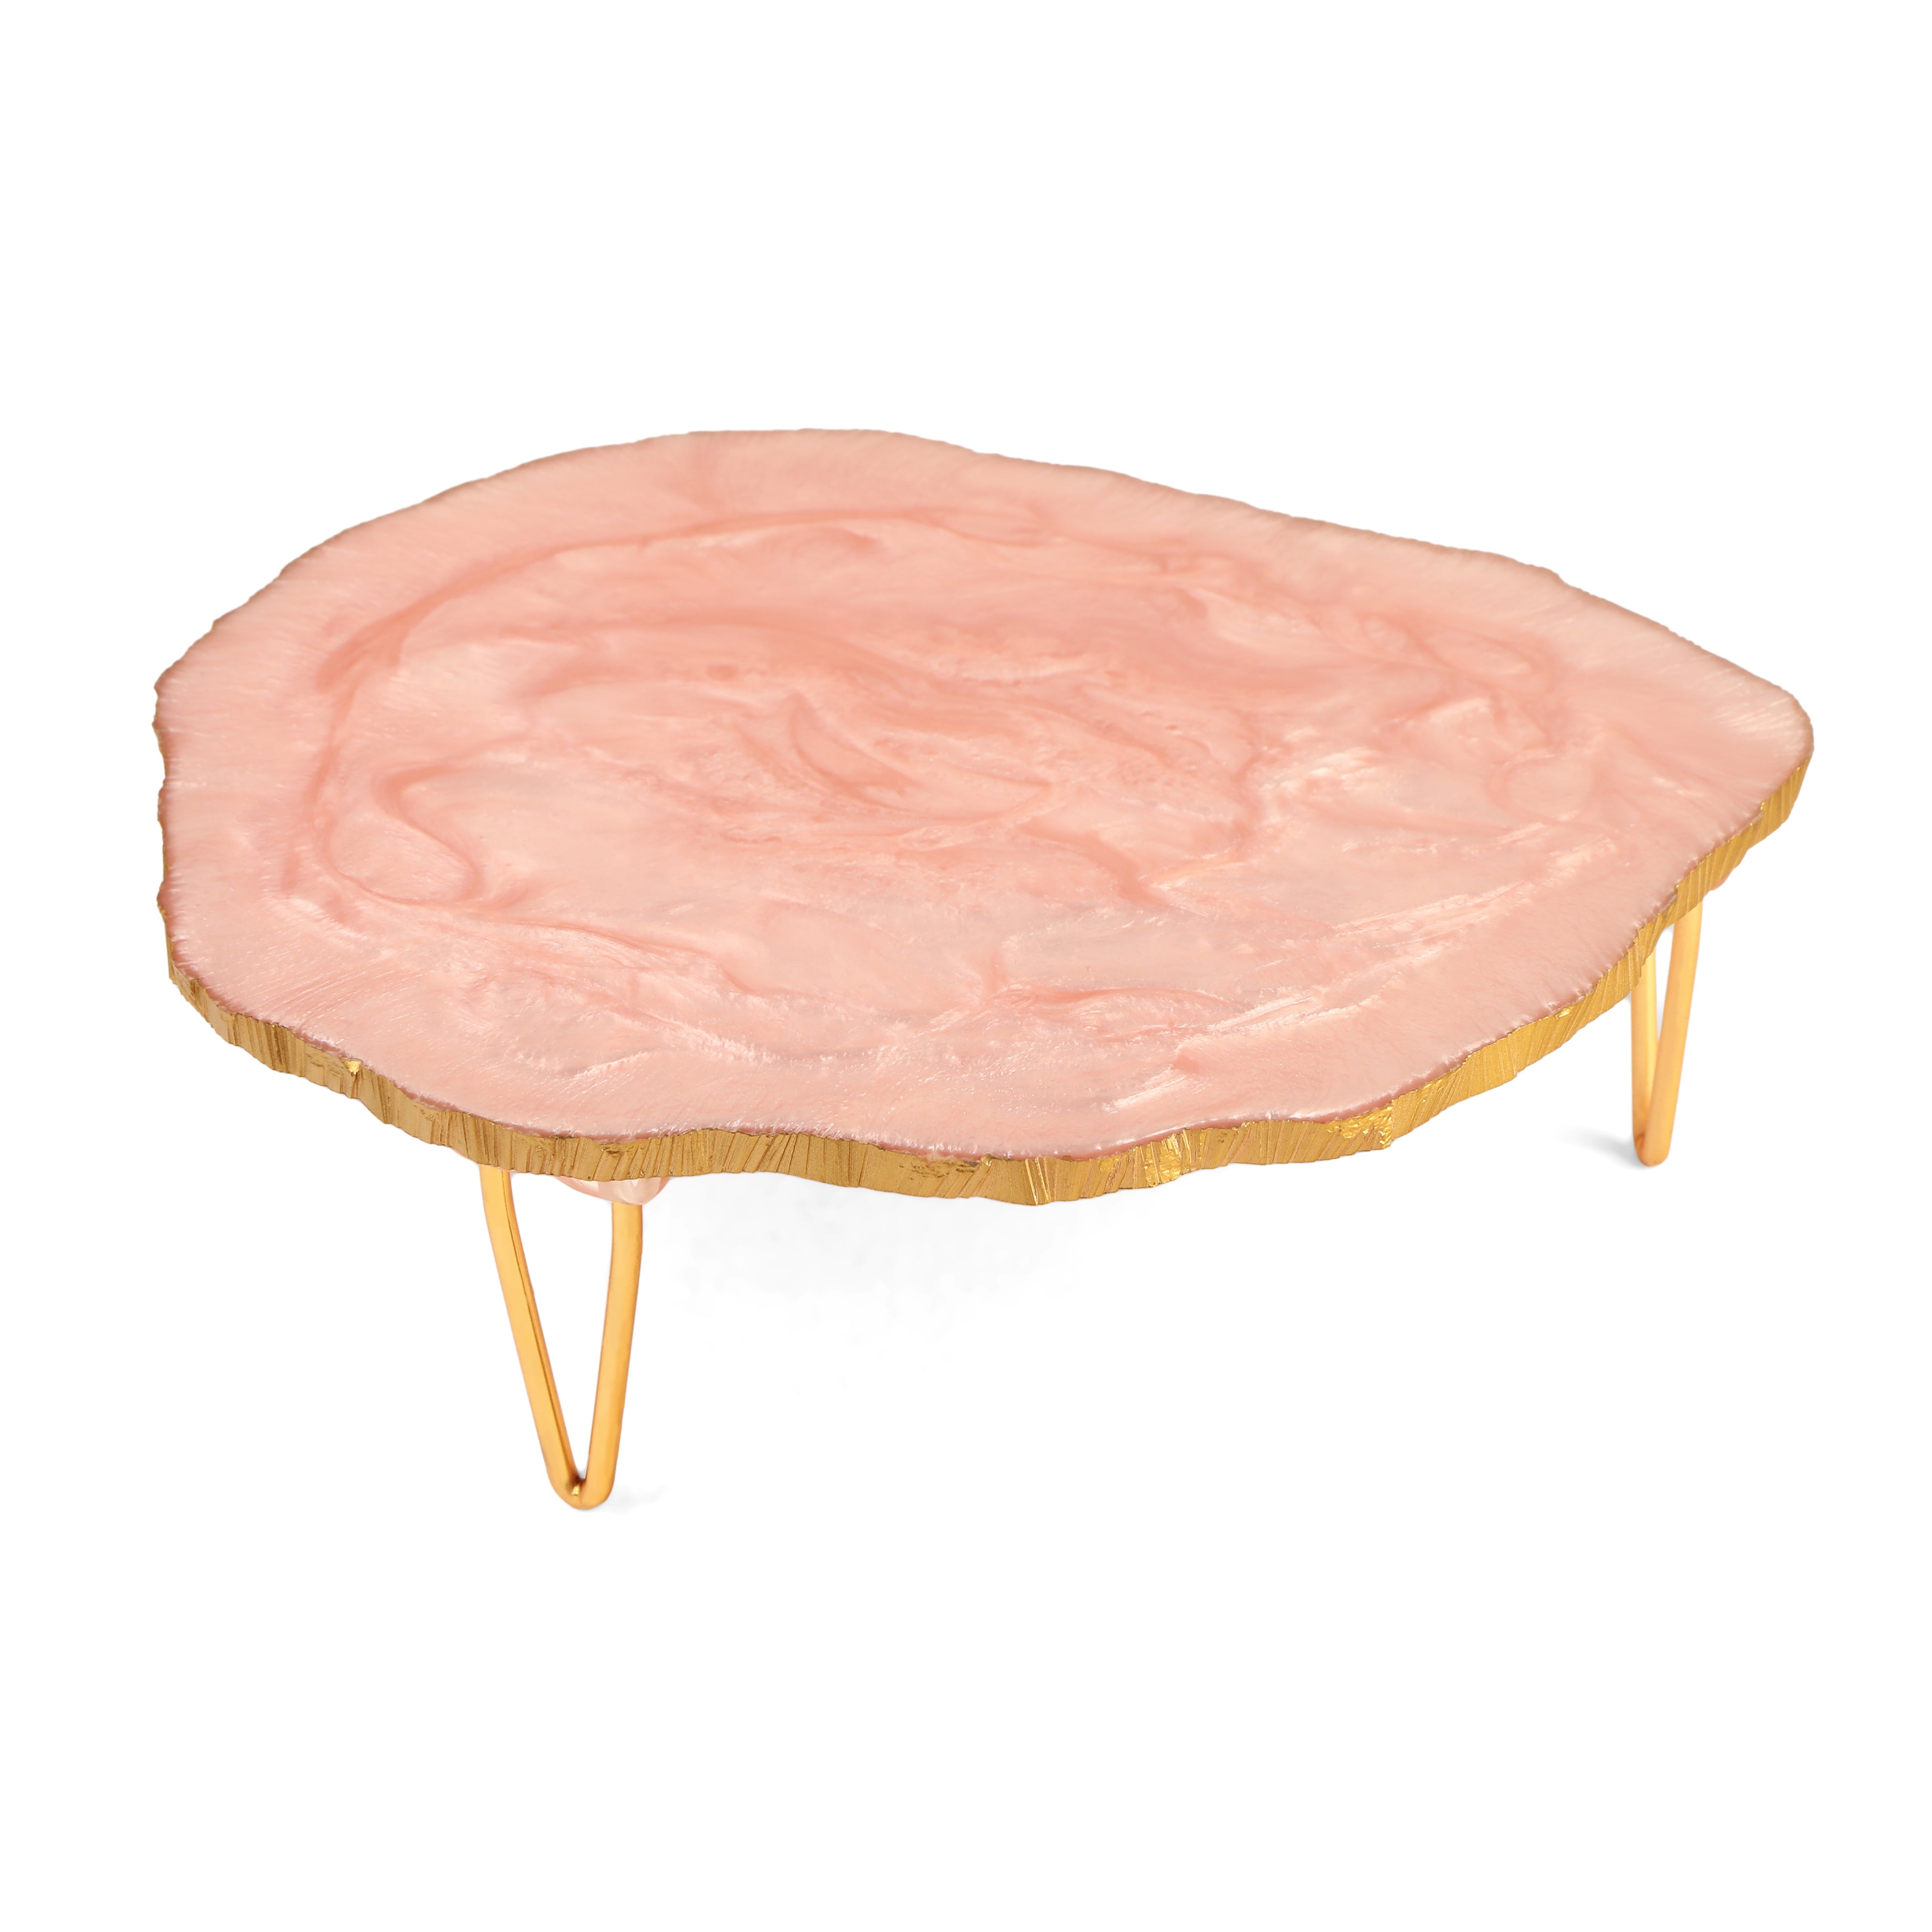 Cake Stand - Pink Resin